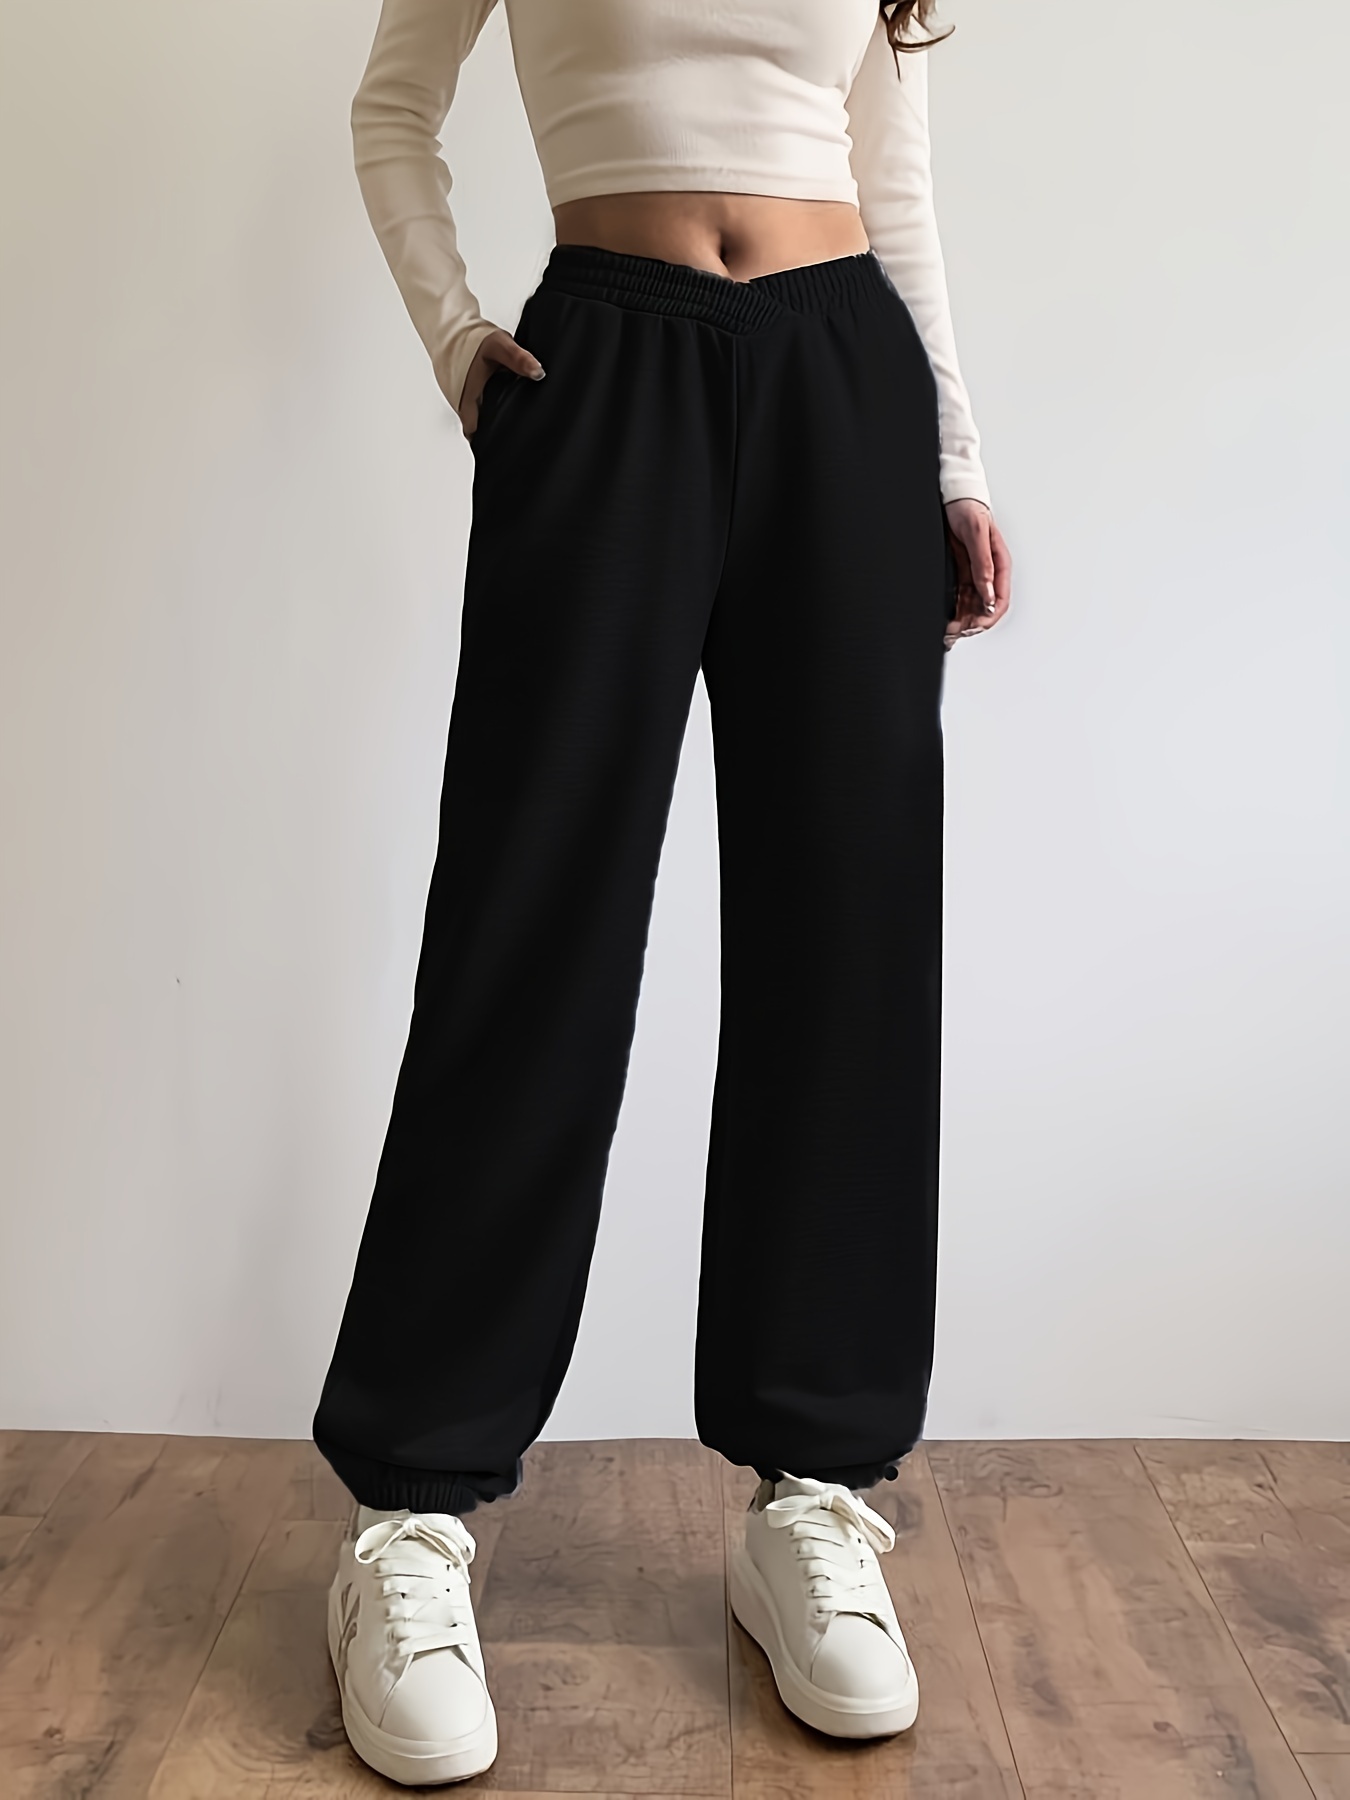 Thick Thighs Thin Patience Women's Sweatpants,Casual Jogging Pants